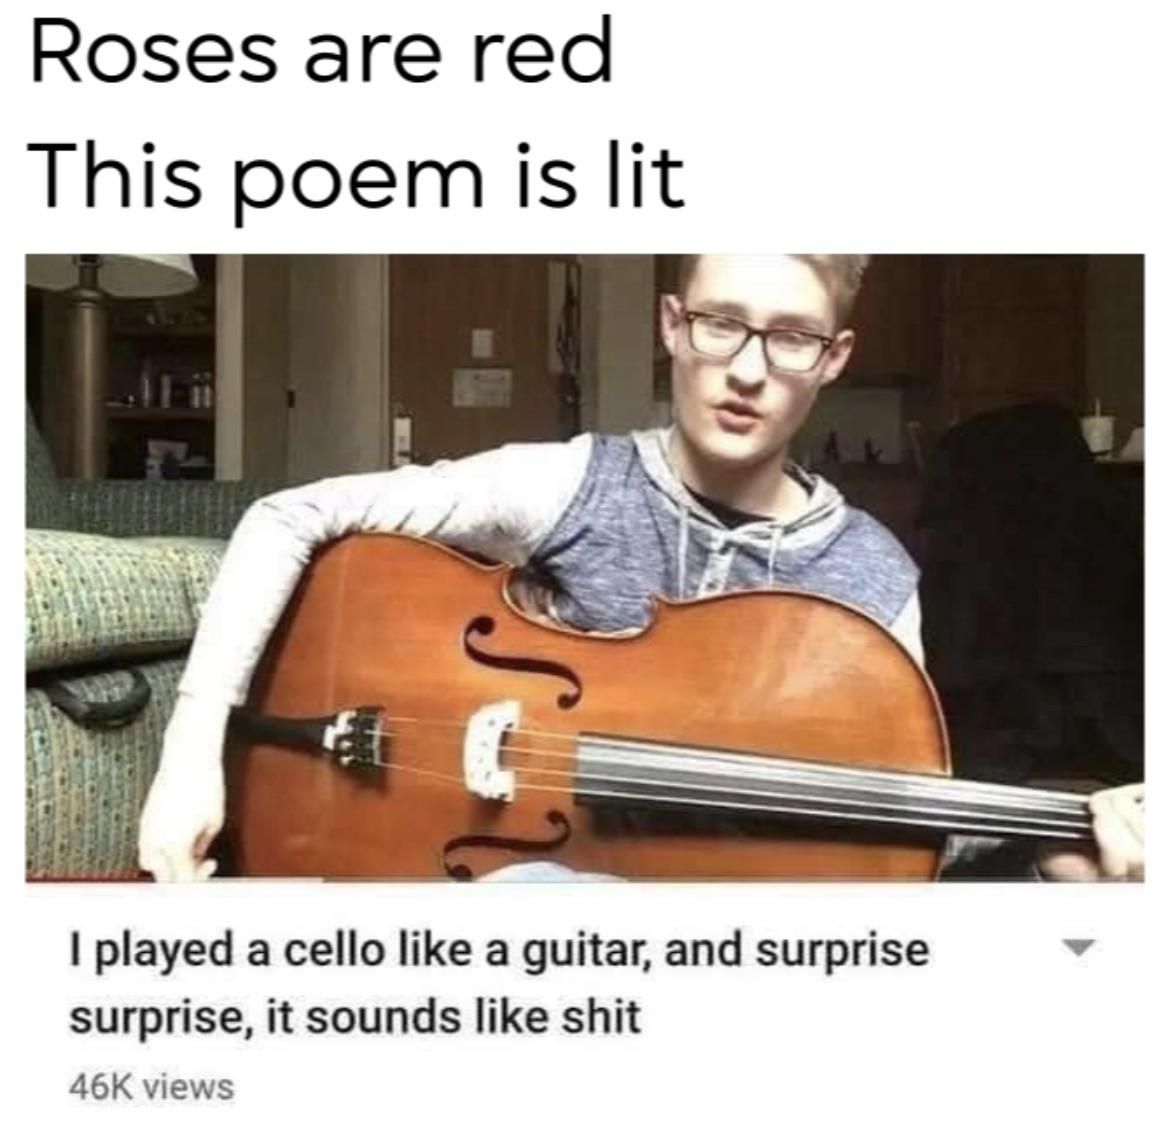 The best poem ever made